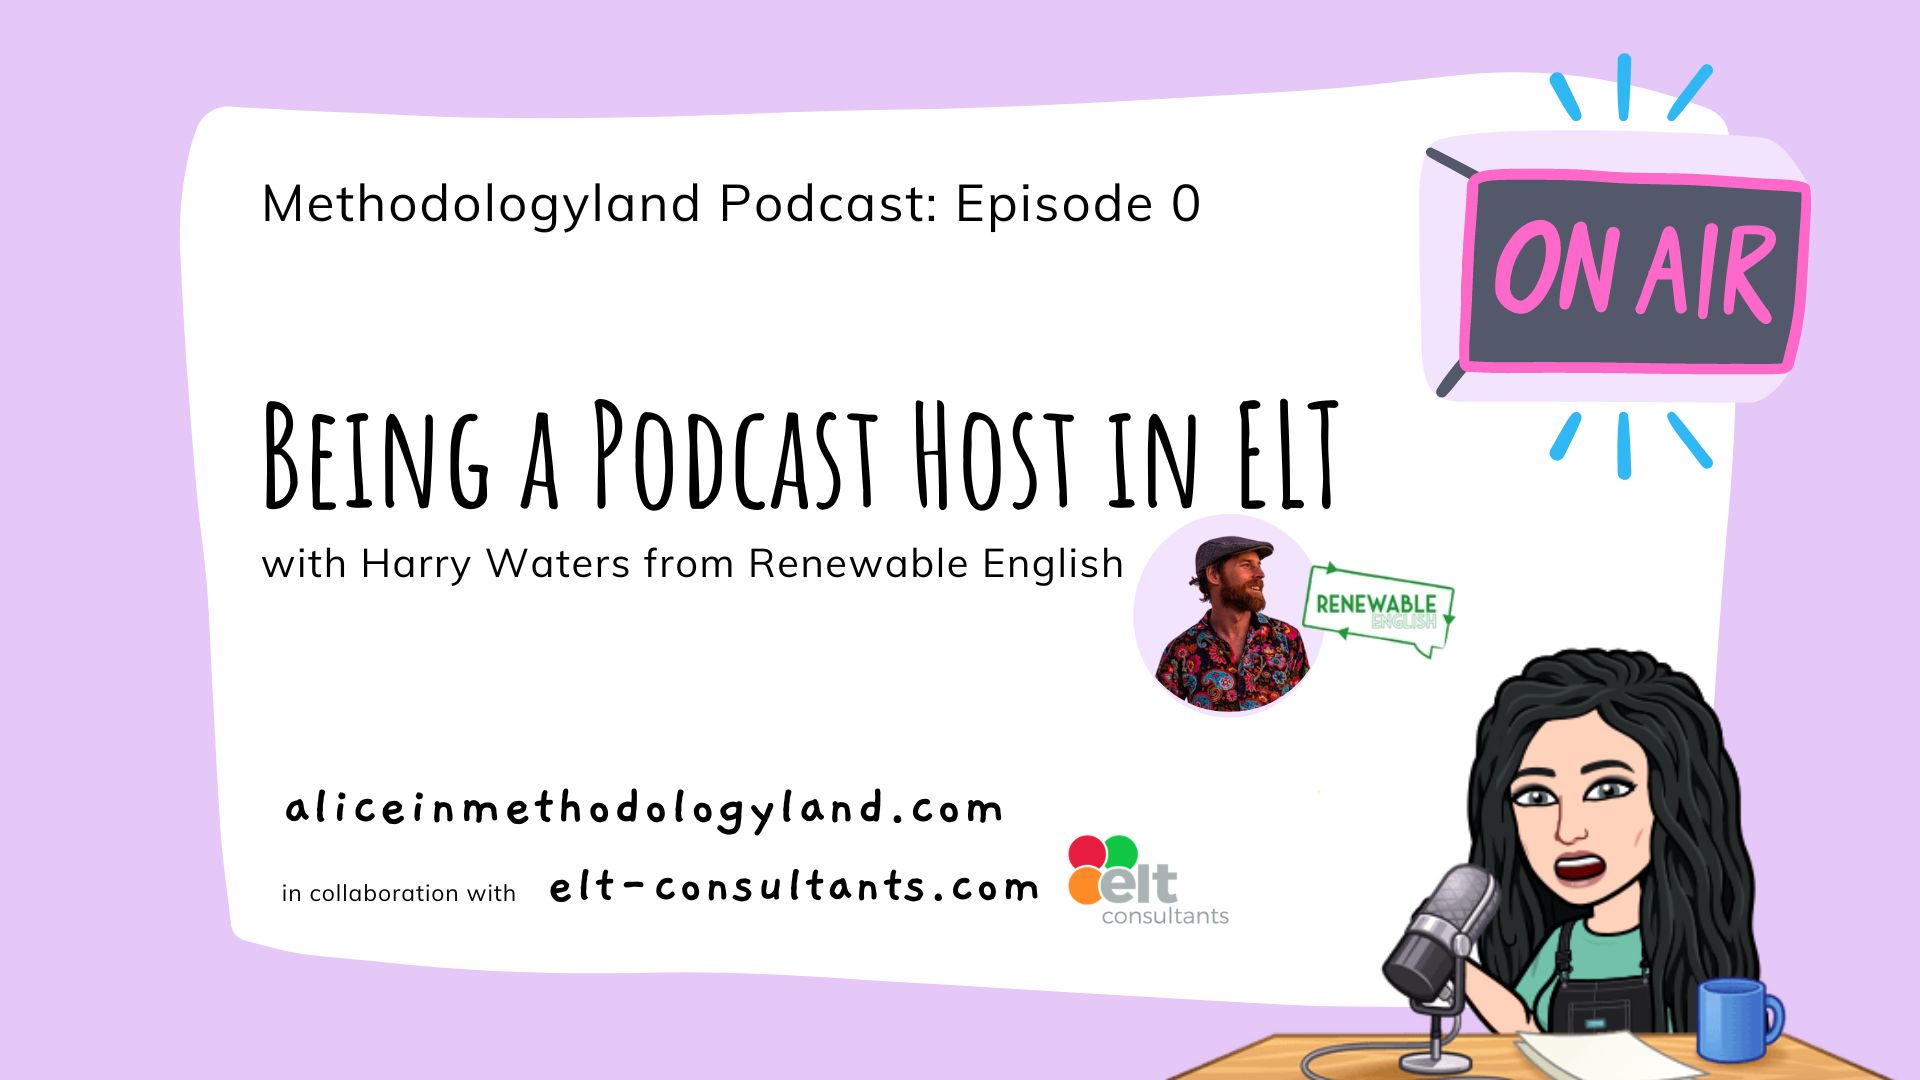 Methodologyland Podcast: Being a Podcast Host in ELT with Harry Waters, Host Milica Alice Vukadin